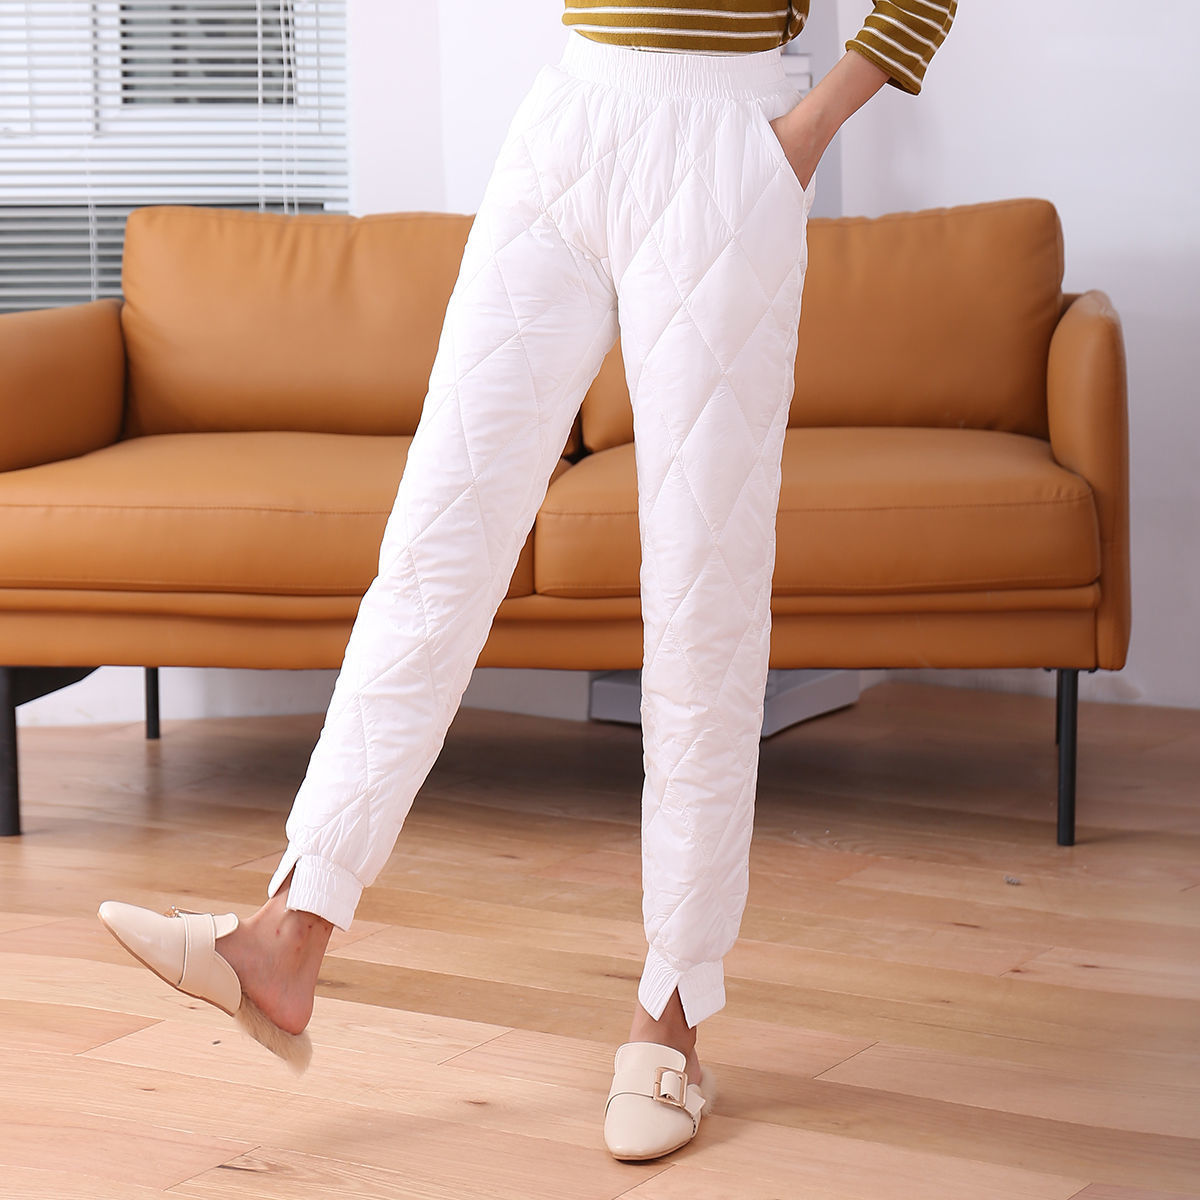 Cotton Trousers For Women